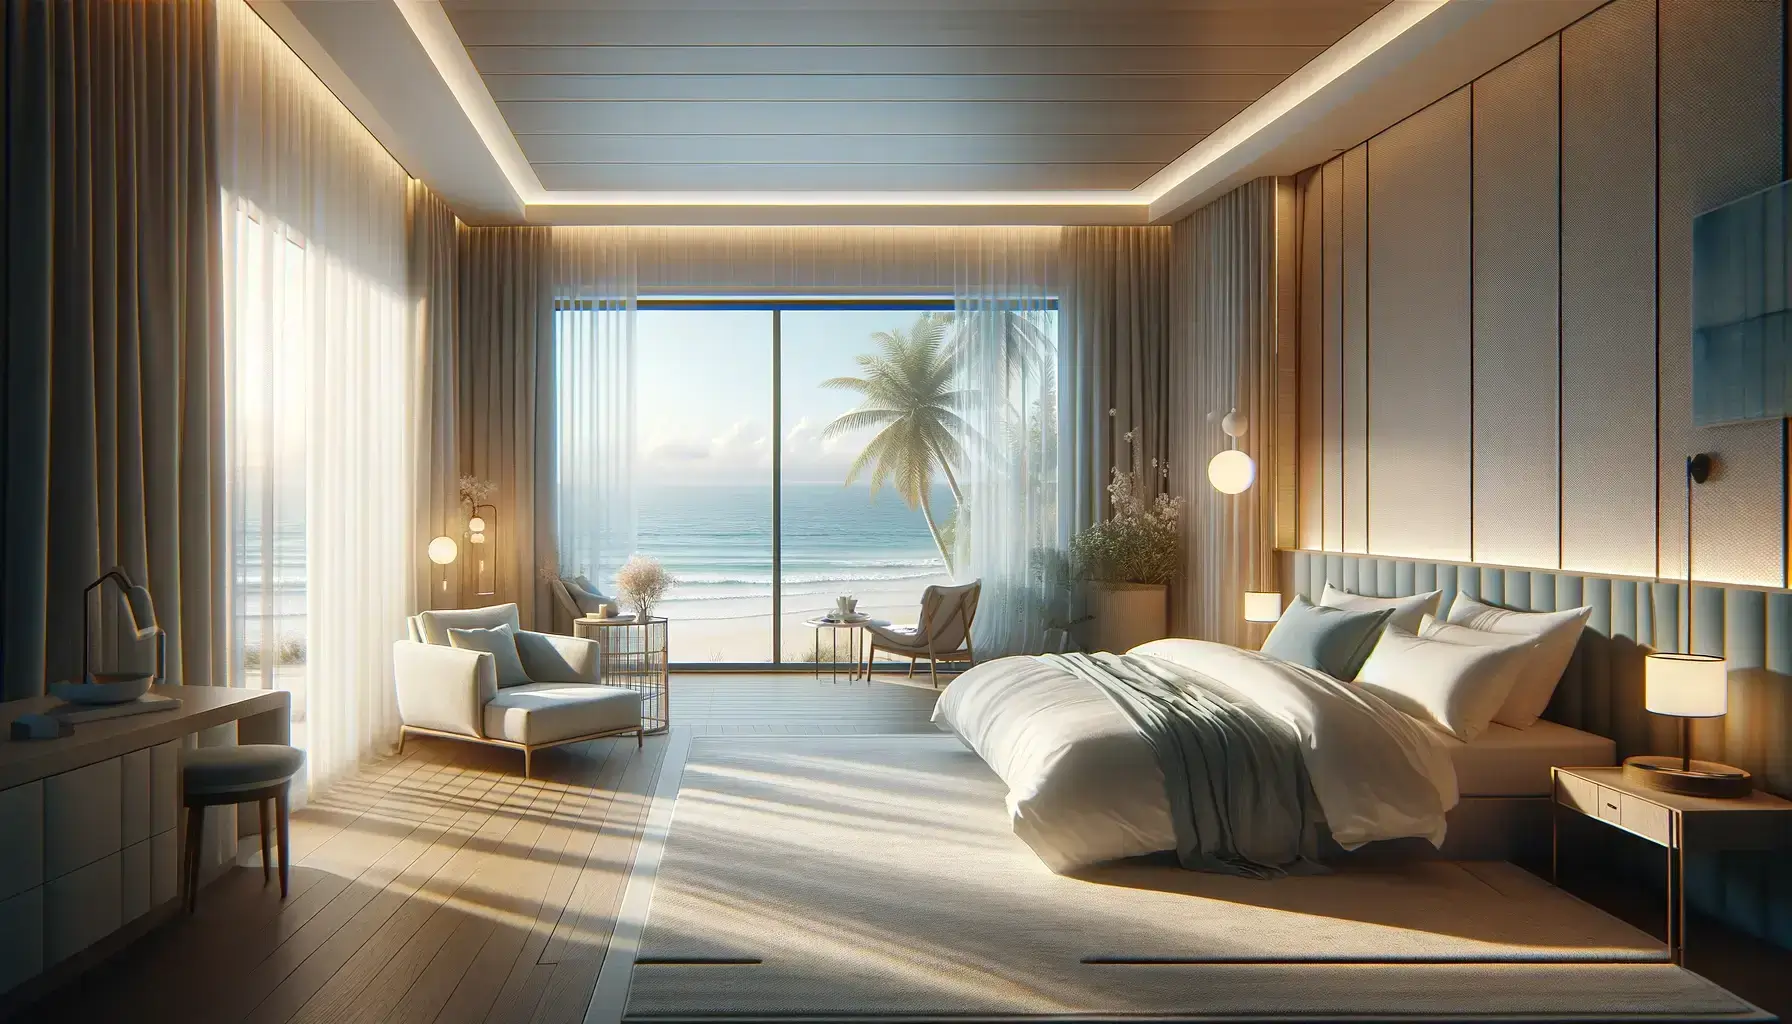 The image shows a spacious and luxurious hotel room with a modern, minimalist aesthetic. It features a large, comfortable bed with white linen in the center. The room is bathed in natural light coming from a large glass window draped with light curtains, framing a picturesque view of the ocean and a palm tree. The room’s color palette is soft and neutral, with hints of blue reflecting the seascape. A plush armchair sits facing the window, providing an inviting spot for relaxation. The ambient lighting is soft and warm, contributing to the room’s tranquil and welcoming vibe.